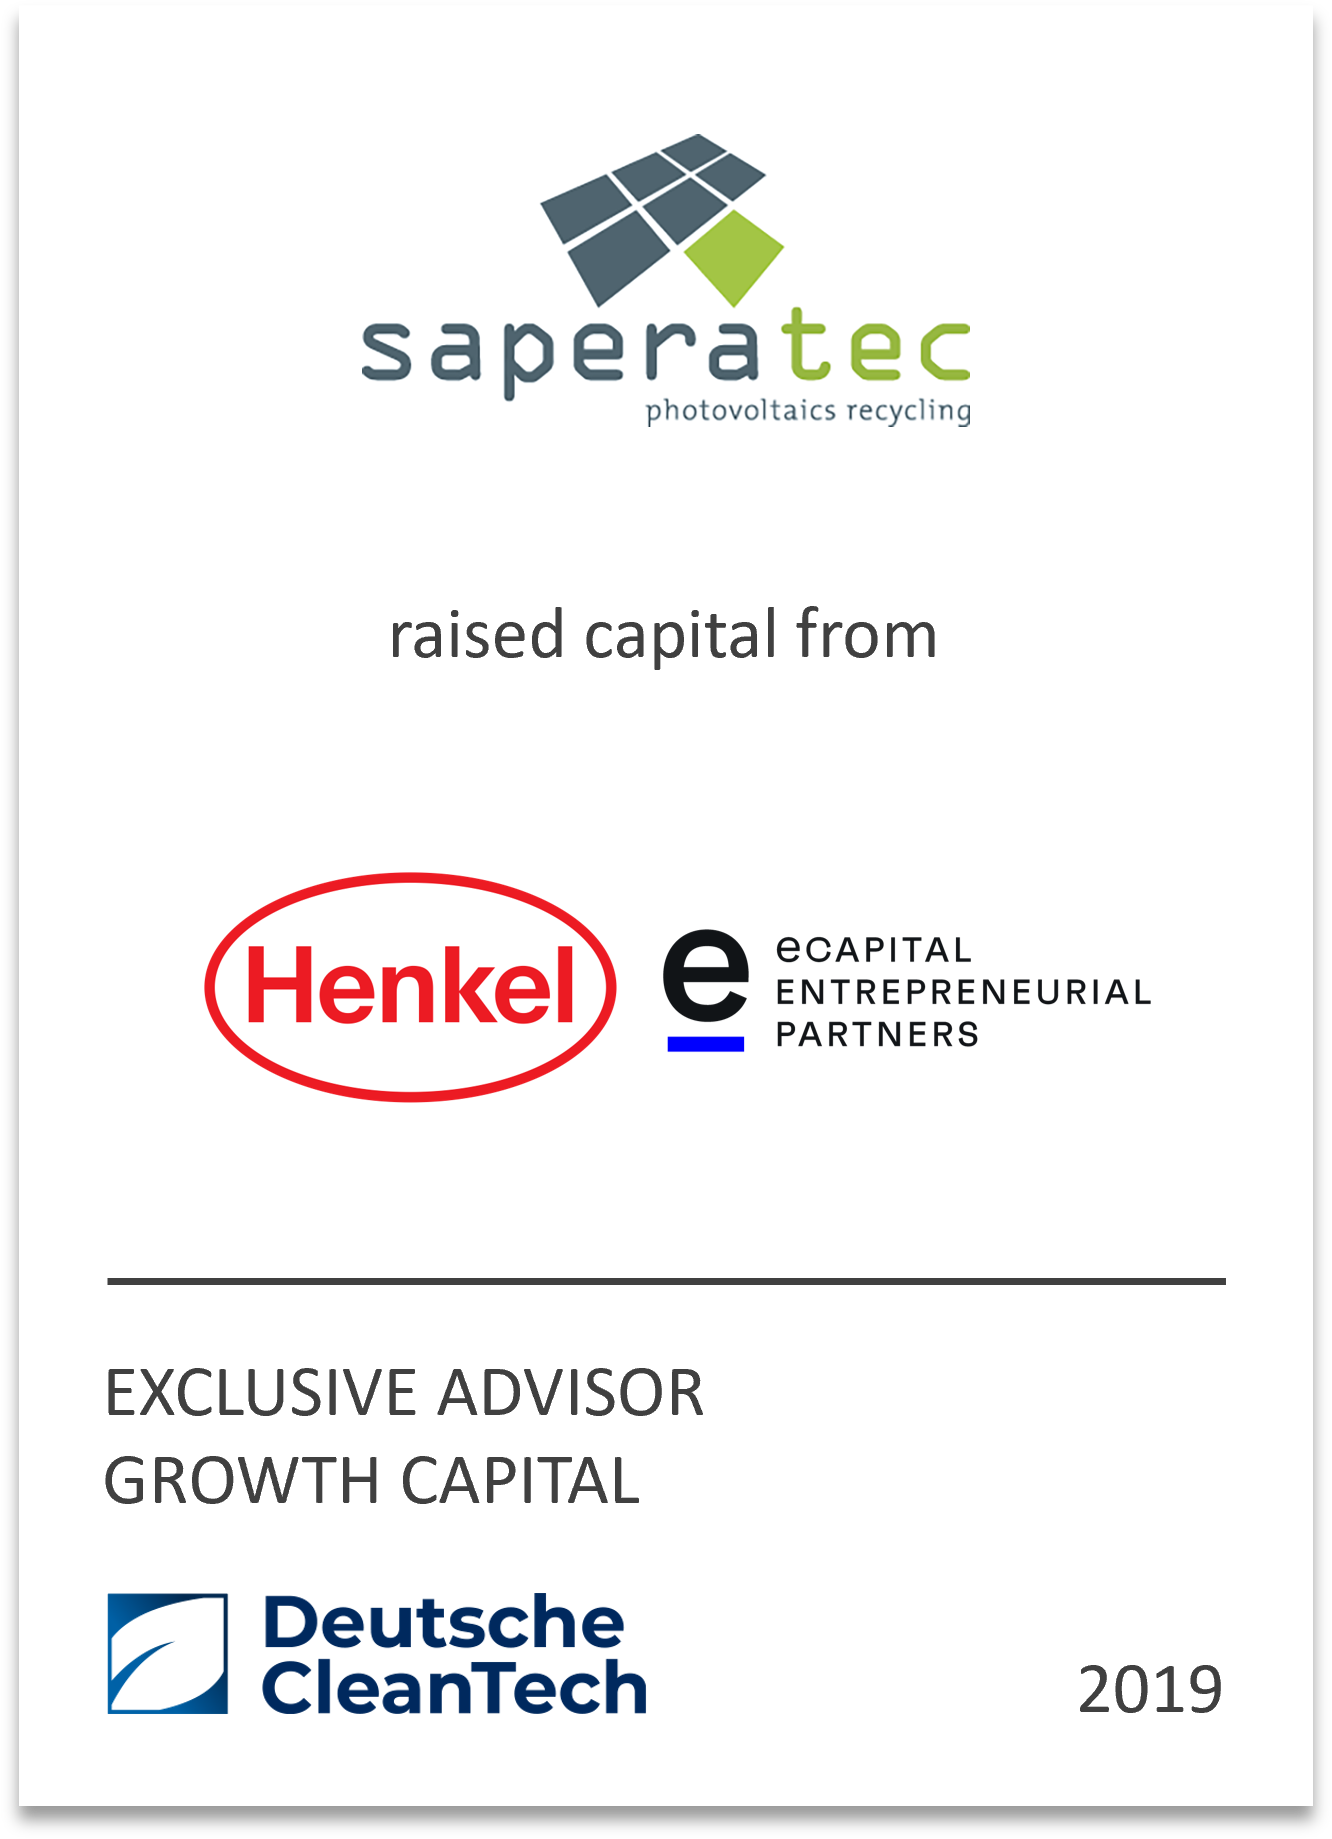 Capital increase of a total volume of EUR 25m (equity and debt) led by Henkel AG & Co. KGaA